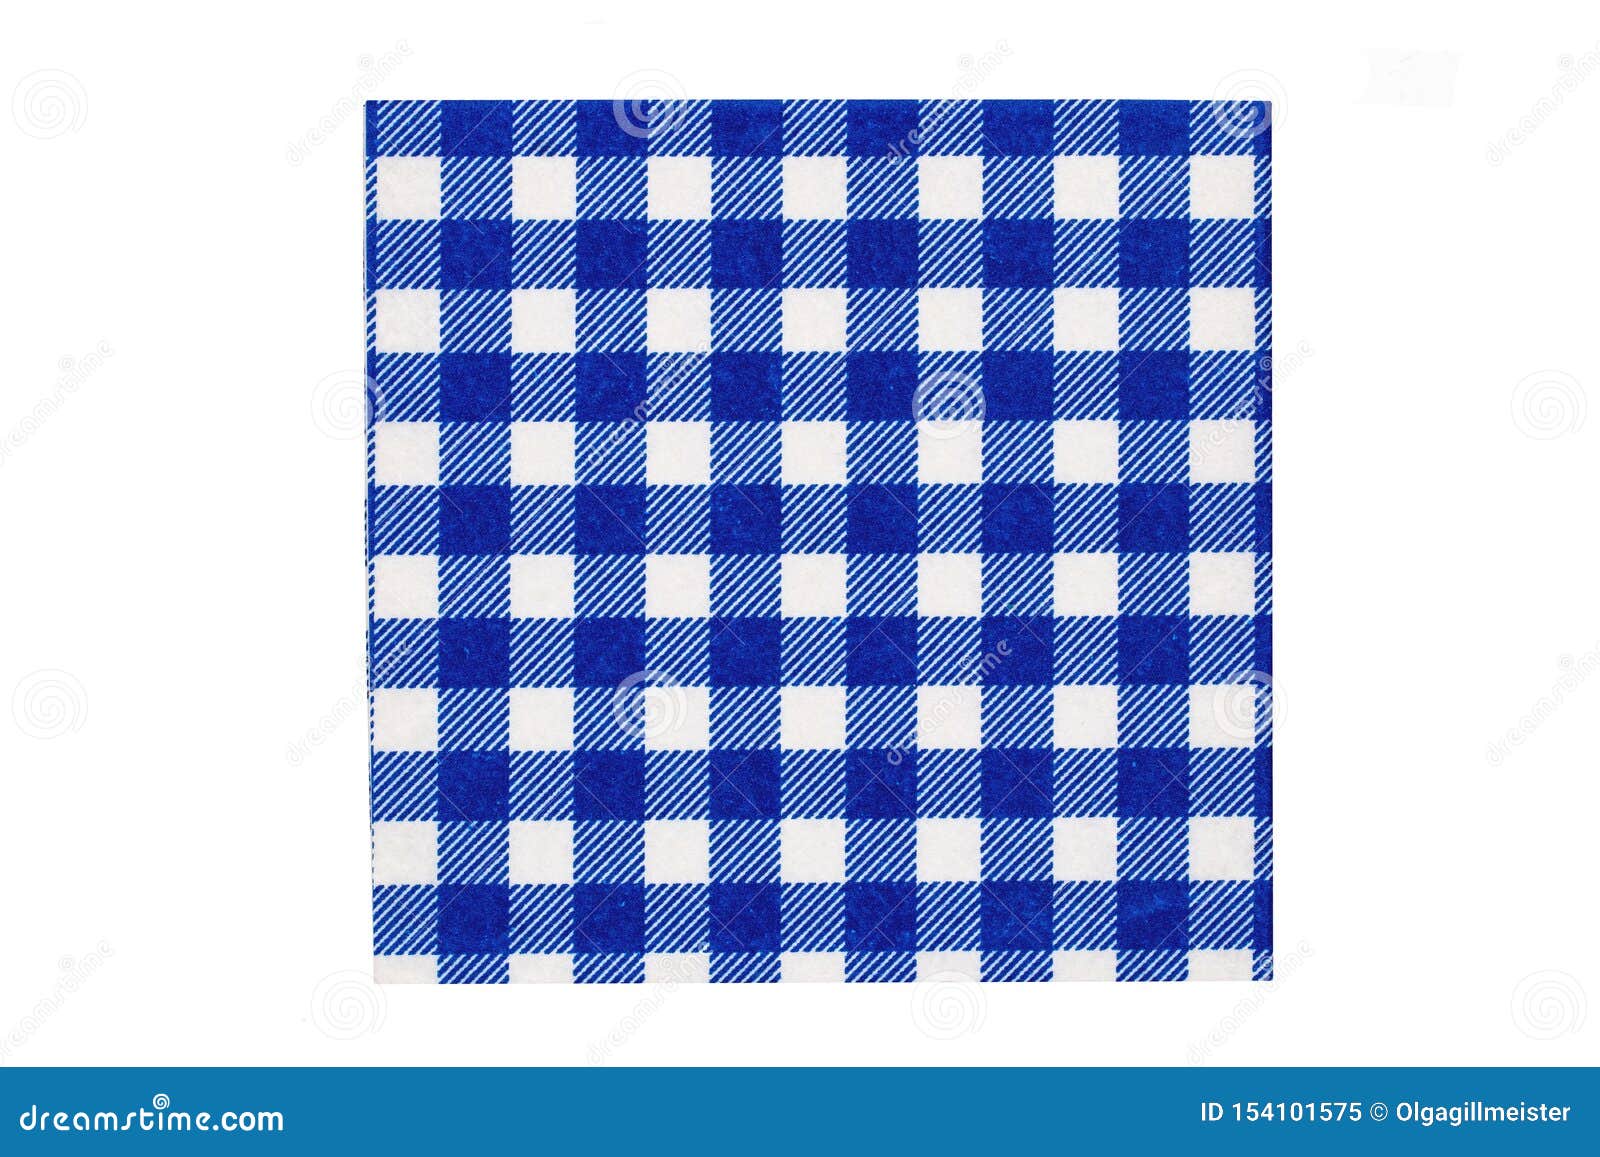 Closeup Of A Blue And White Checkered Kitchen Cloth Or Napkin Isolated On White Background Kitchen Accessories Macro Stock Image Image Of Decoration